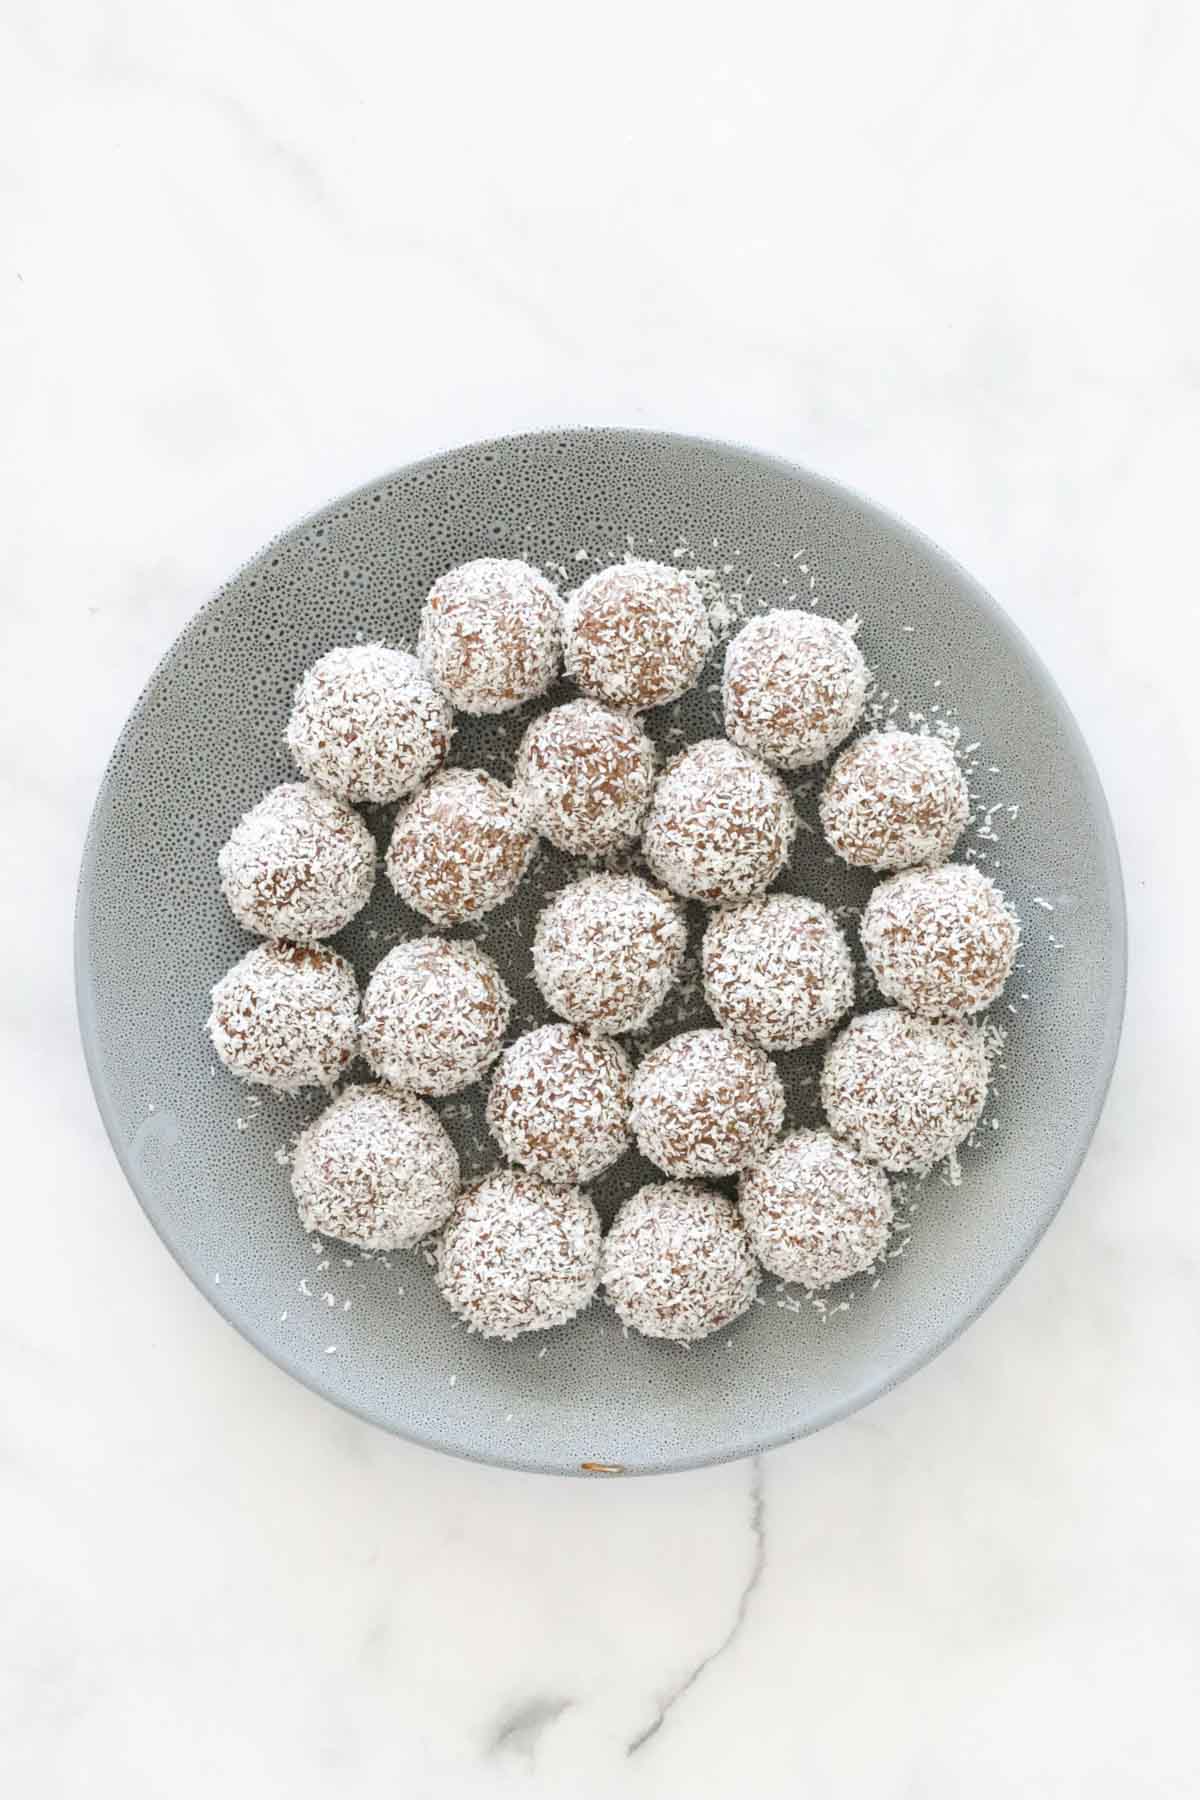 A plate with little coconut coated balls on it.